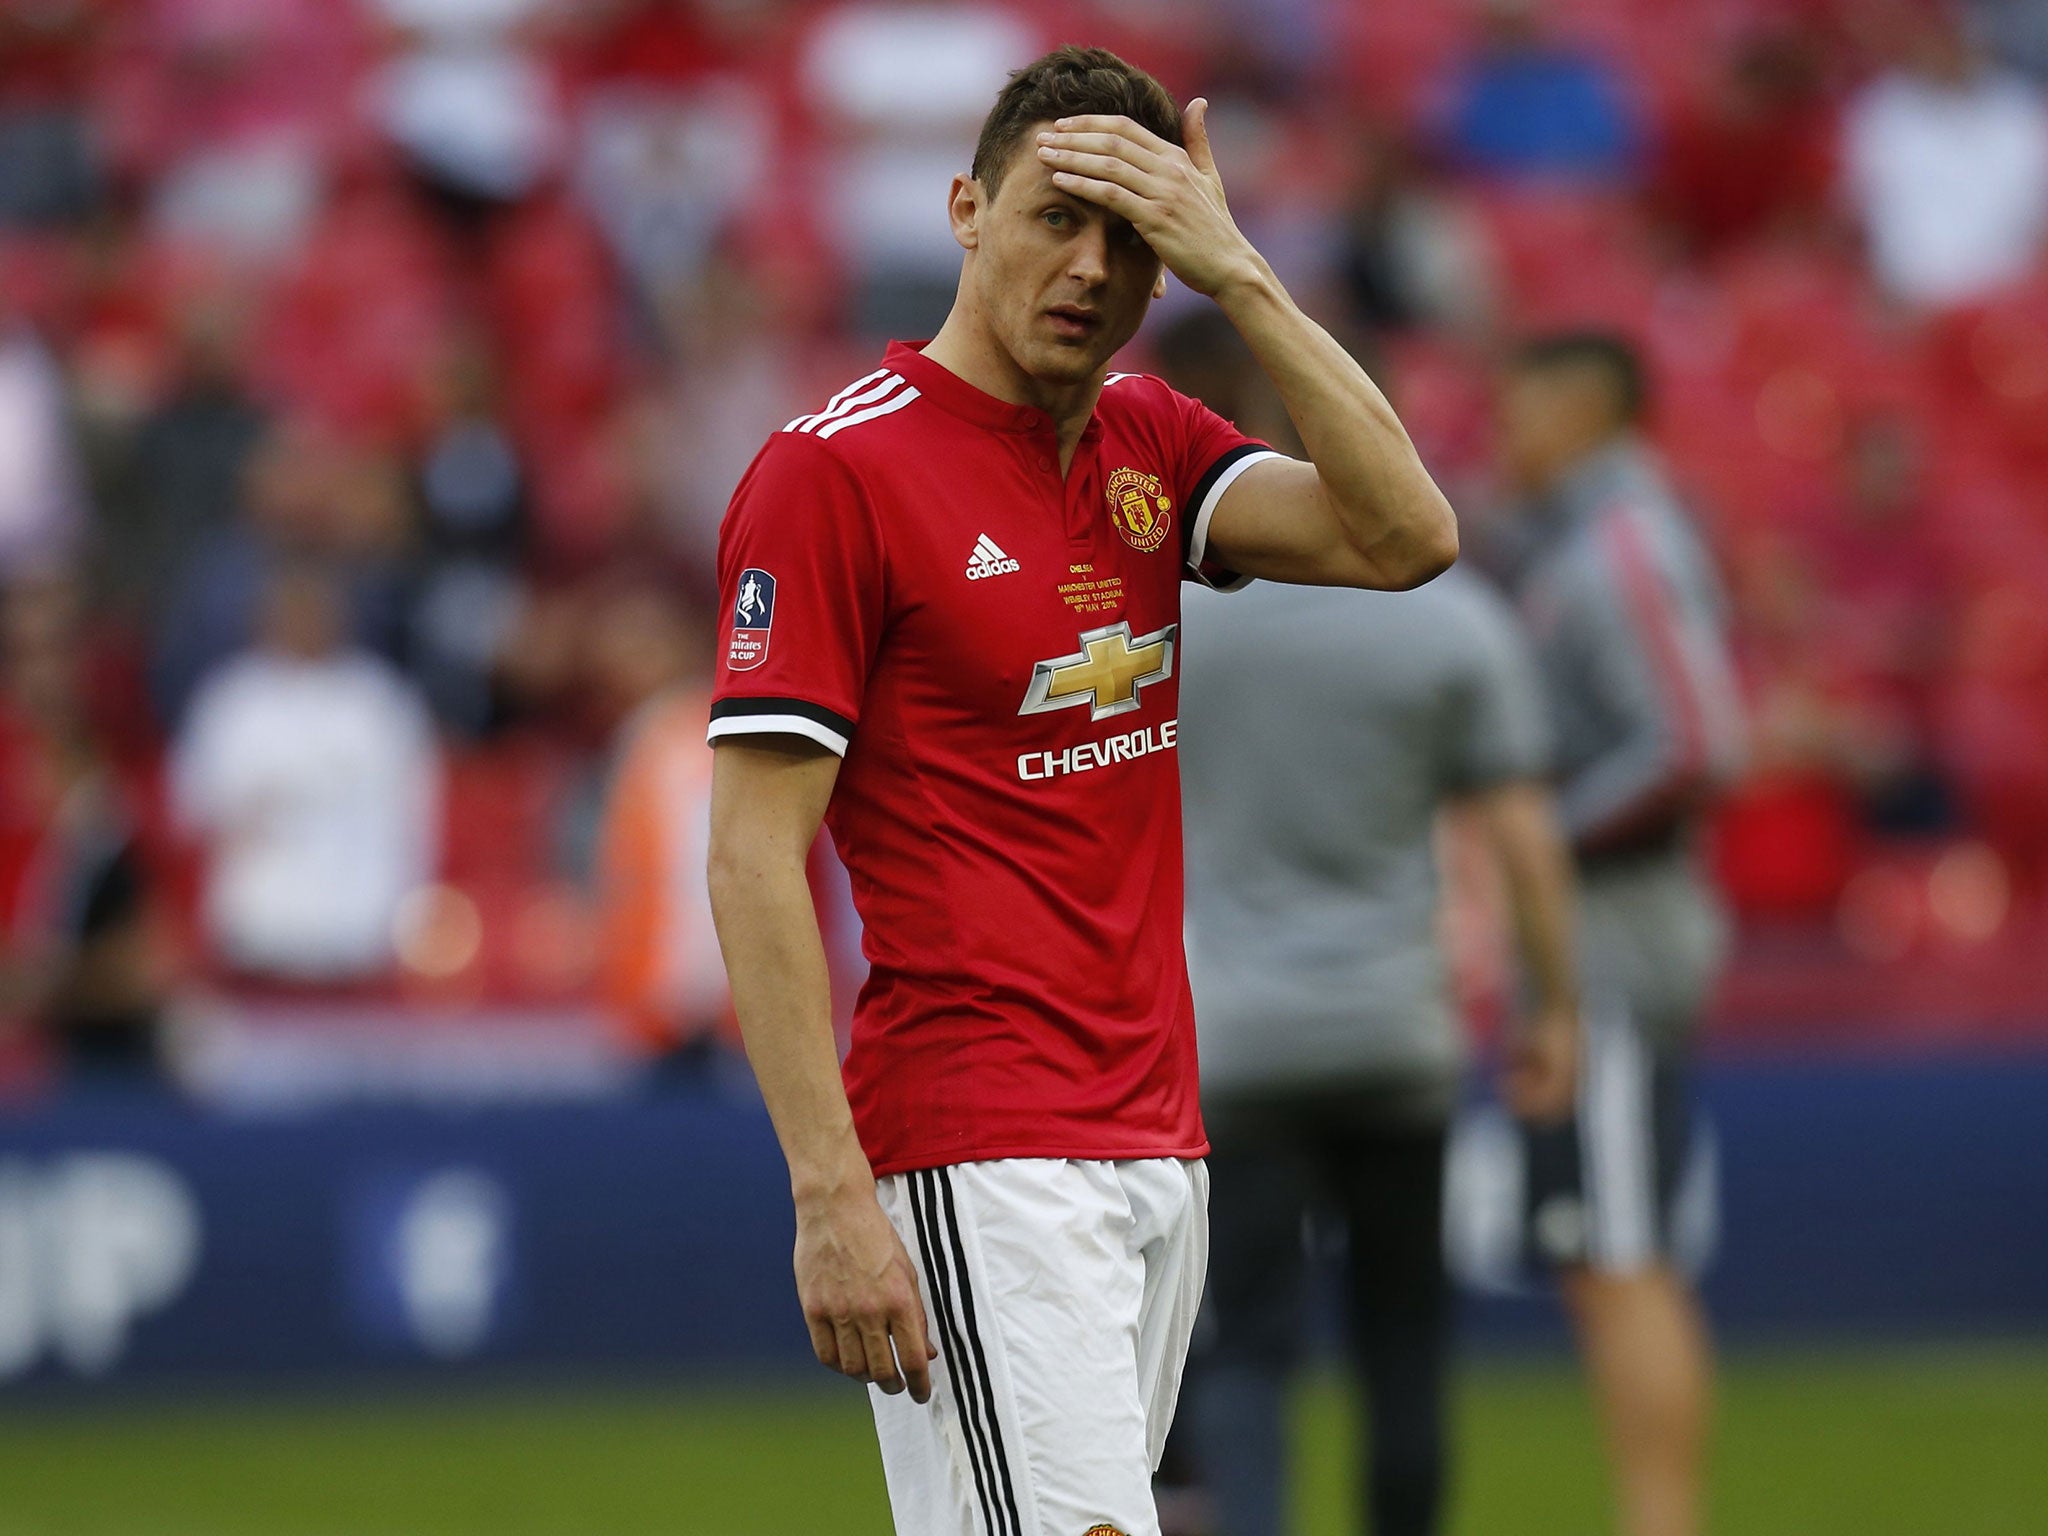 Nemanja Matic looks on after defeat at Wembley